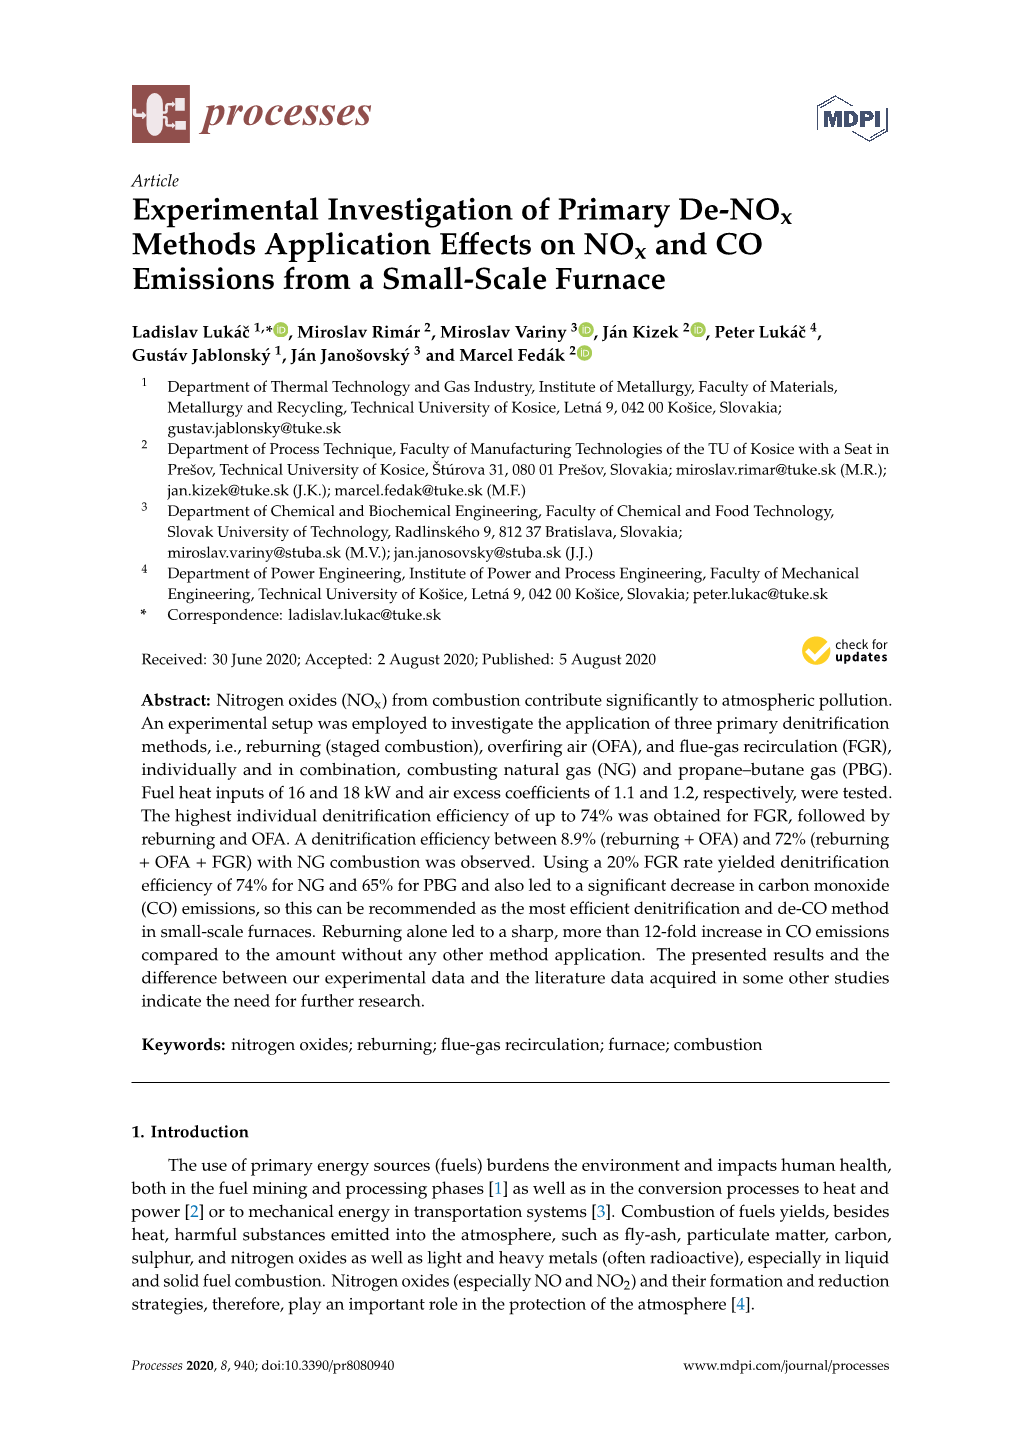 Experimental Investigation of Primary De-Nox Methods Application Eﬀects on Nox and CO Emissions from a Small-Scale Furnace